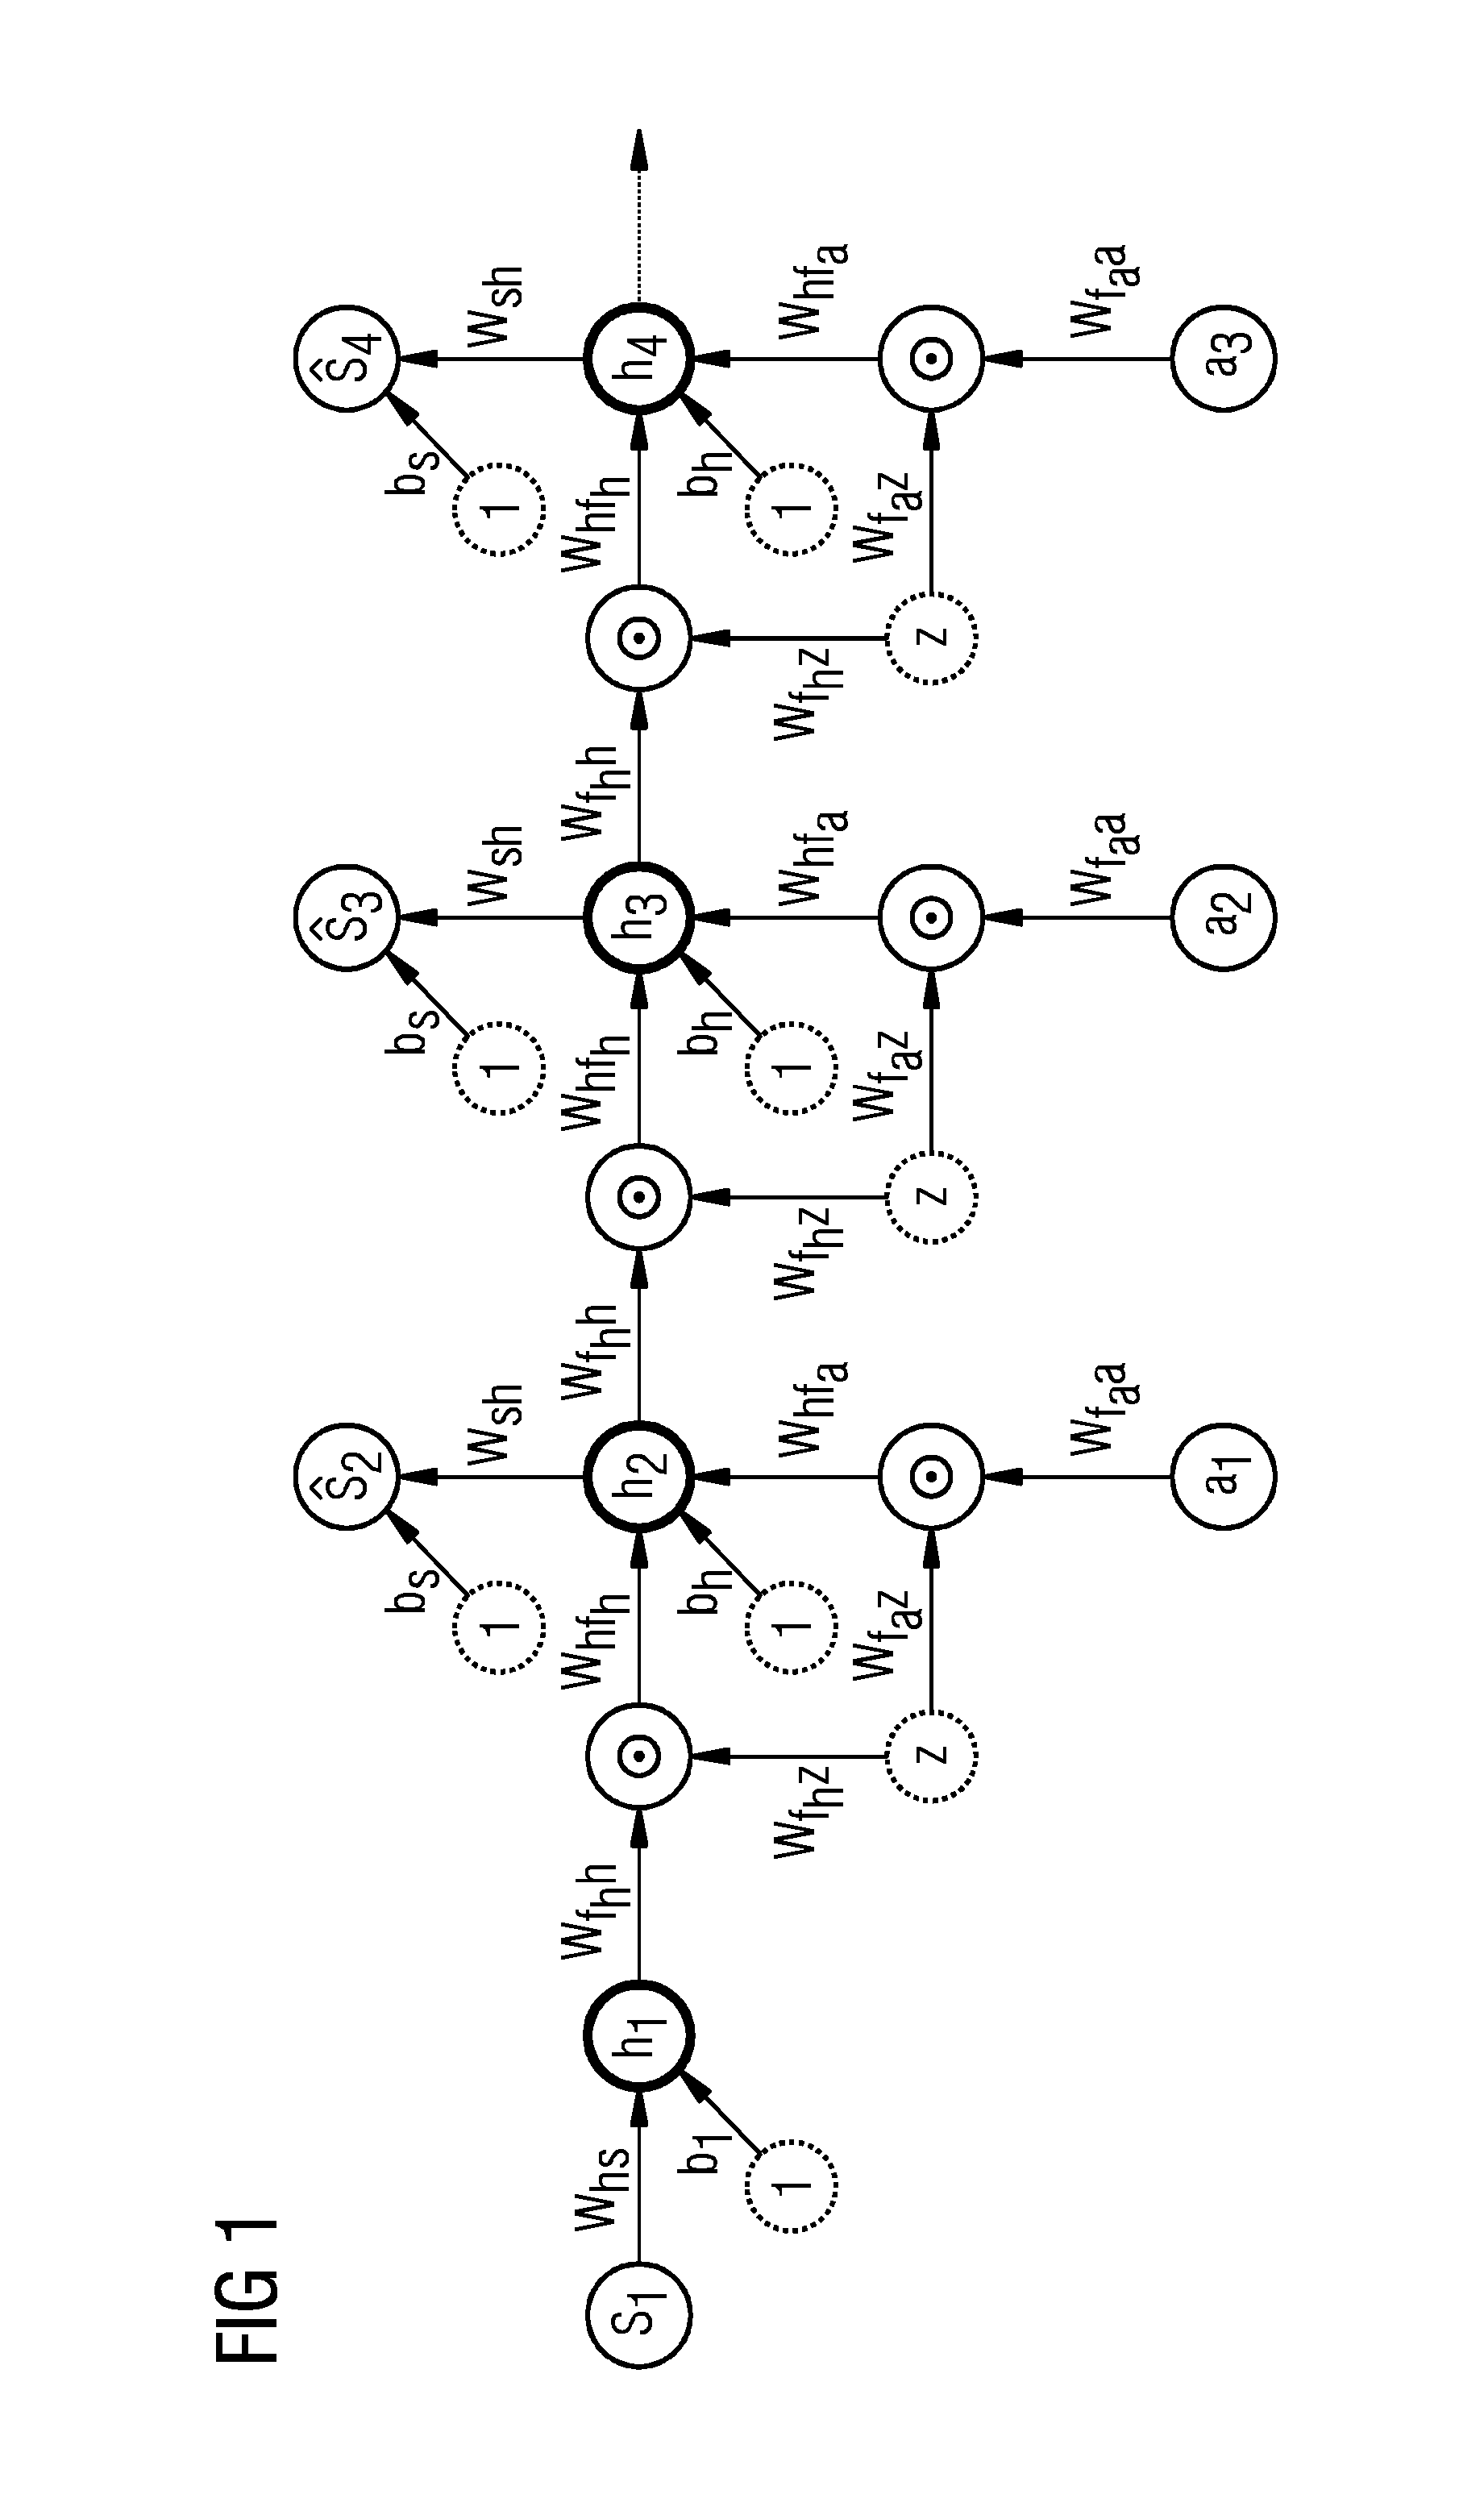 Method, controller, and computer program product for controlling a target system